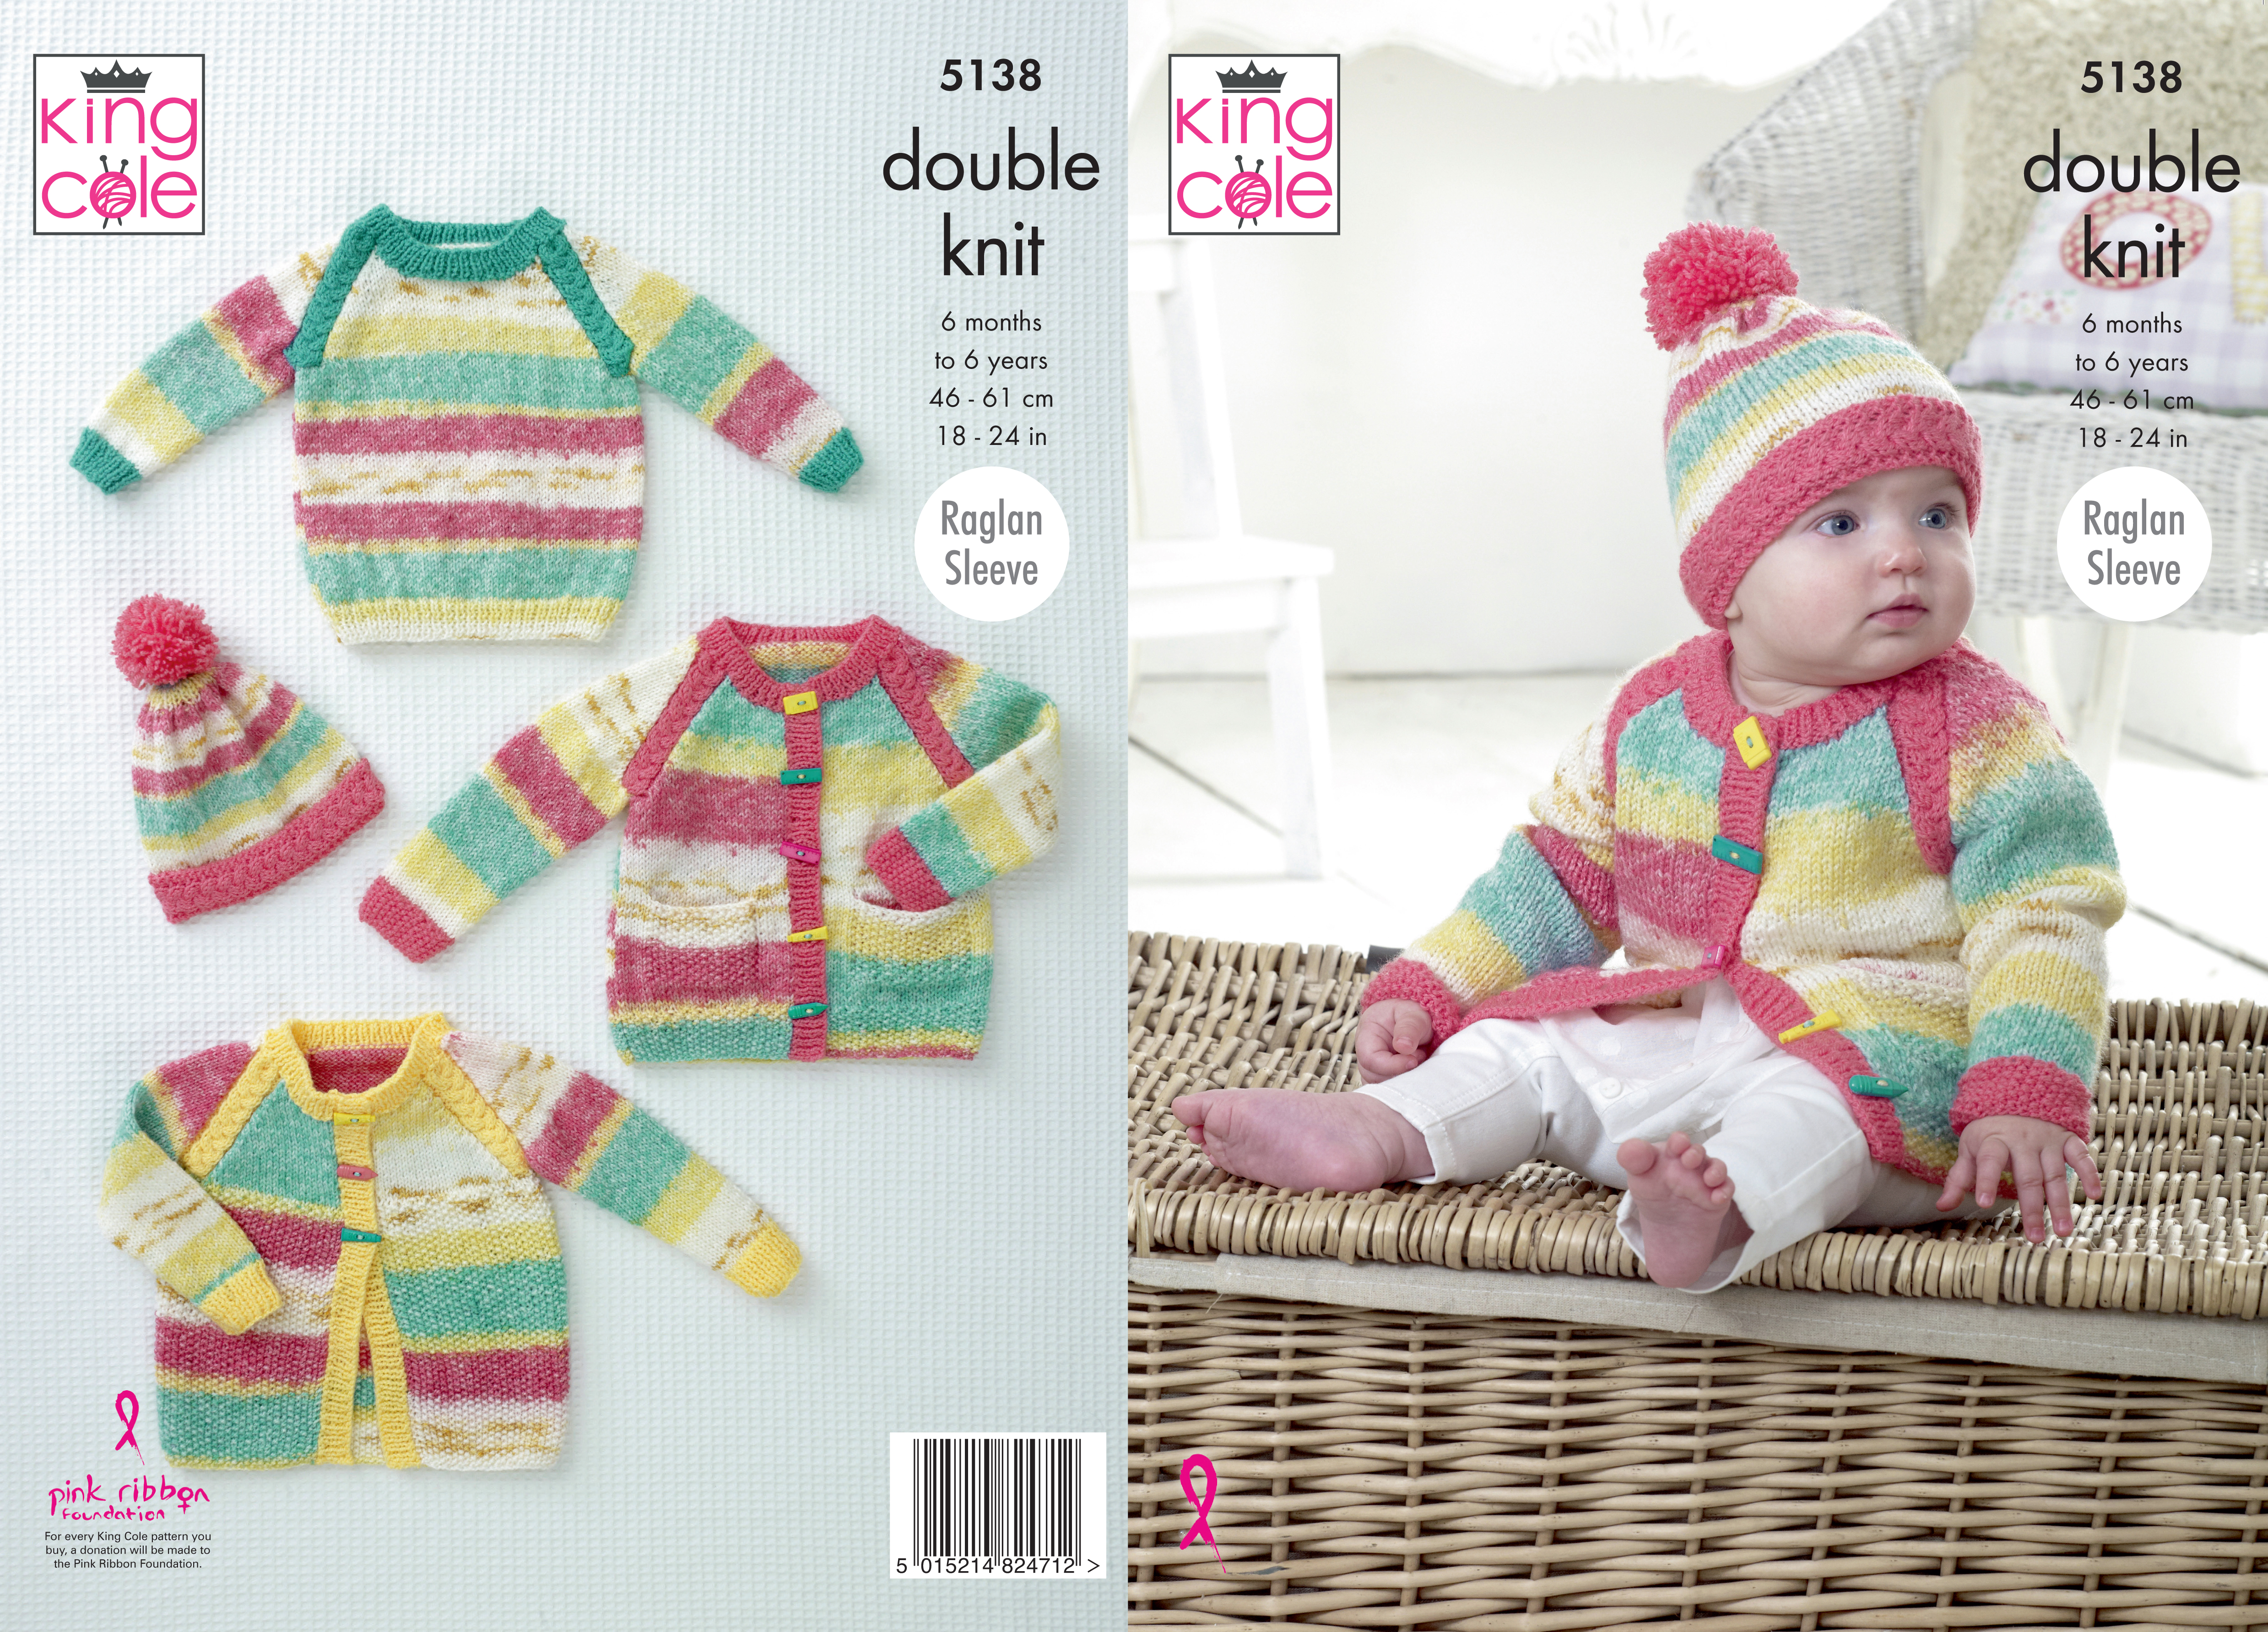 Jacket, Cardigan, Sweater & Hat Knitted in Splash DK 5138 x3 - Click Image to Close